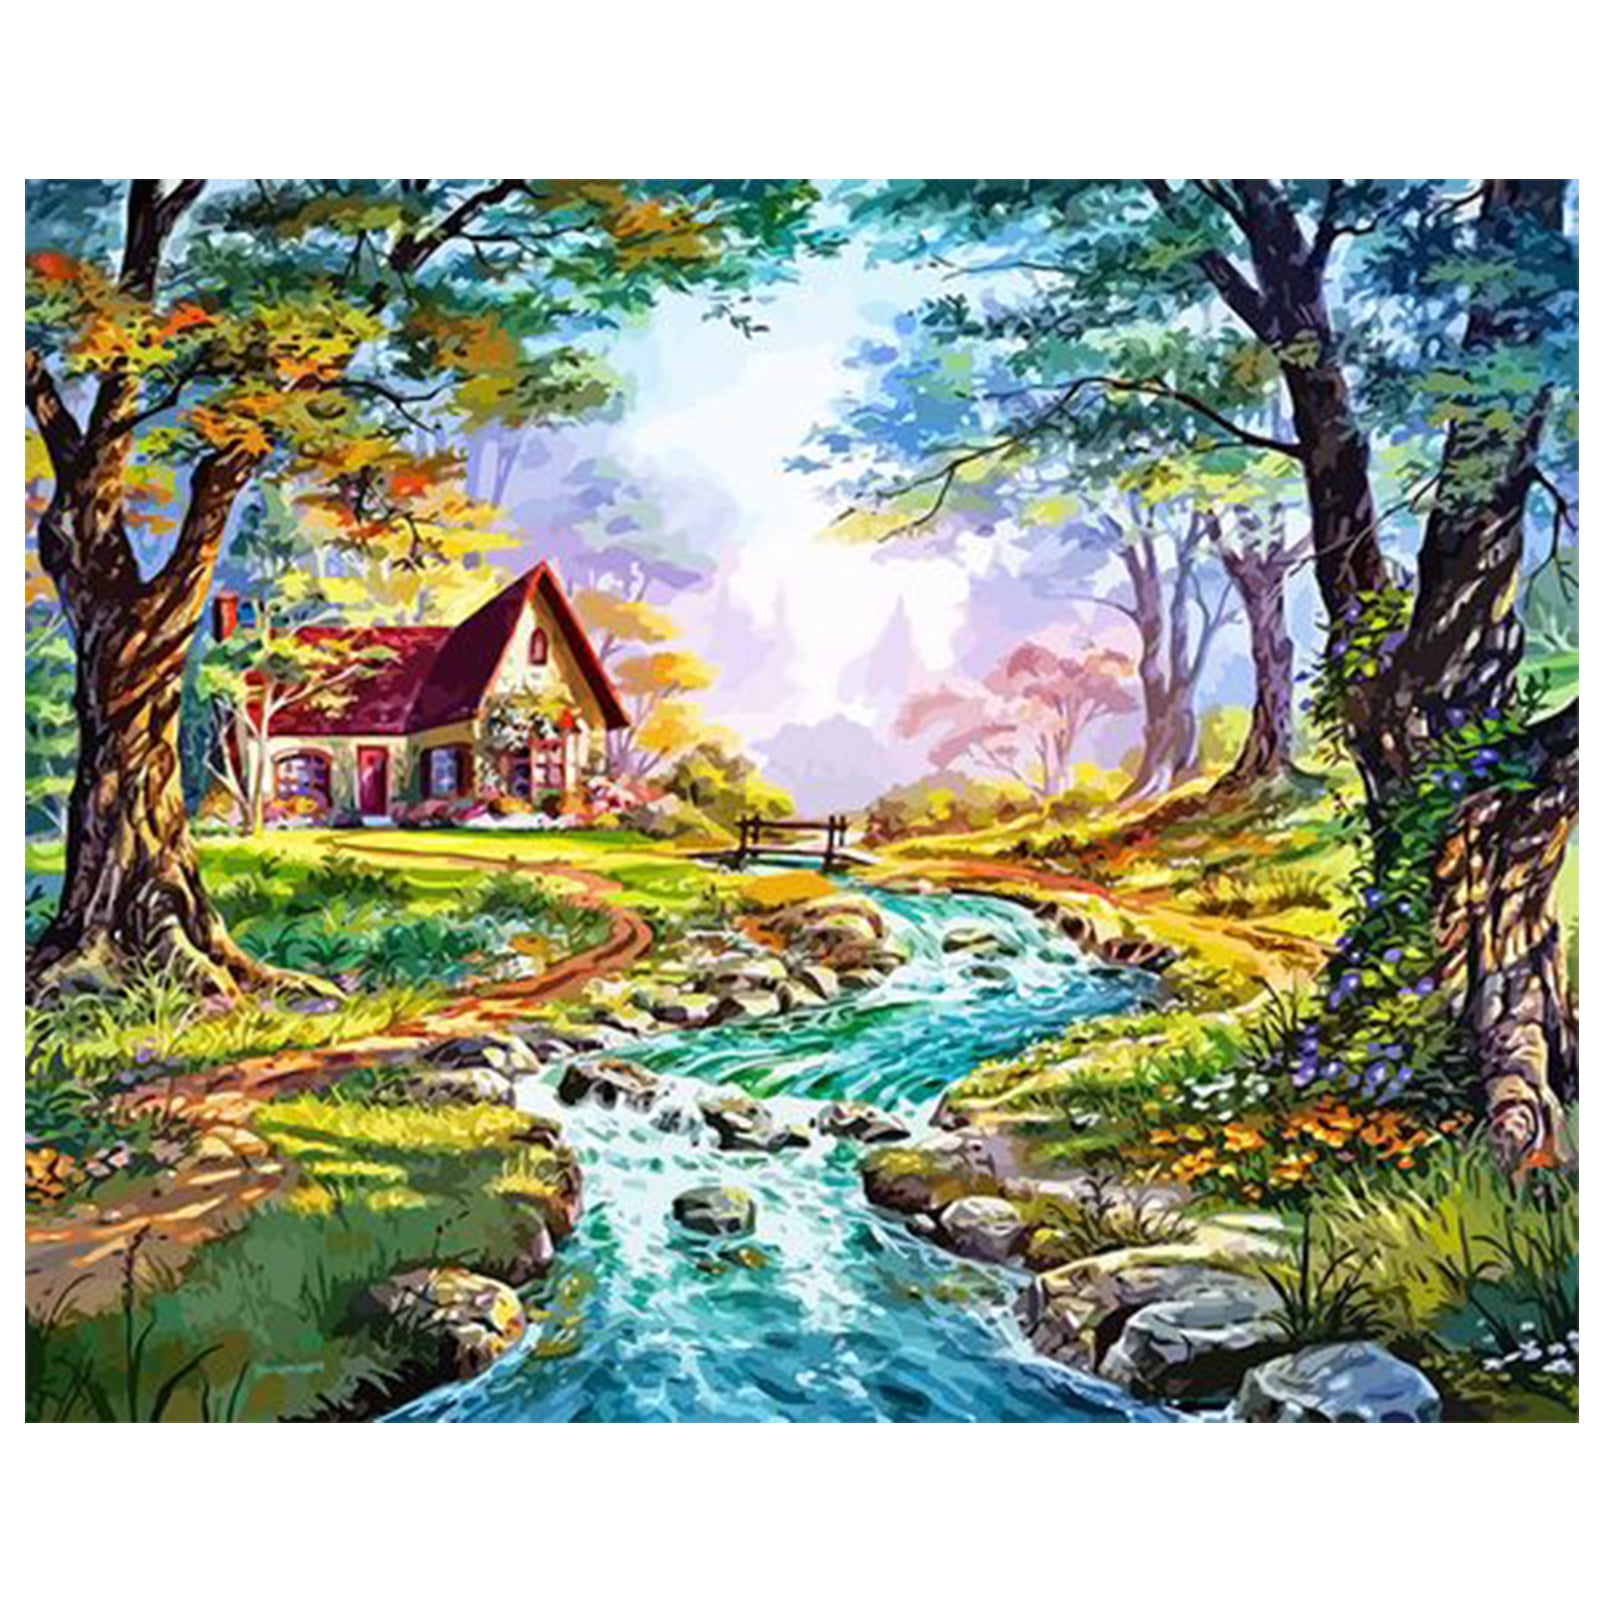 Forest Stream PAINT by NUMBER Kit for Adult Easy Beginner Acrylic Painting Kit,Home Decor Gift For Mom DIY Nature Scenic Art